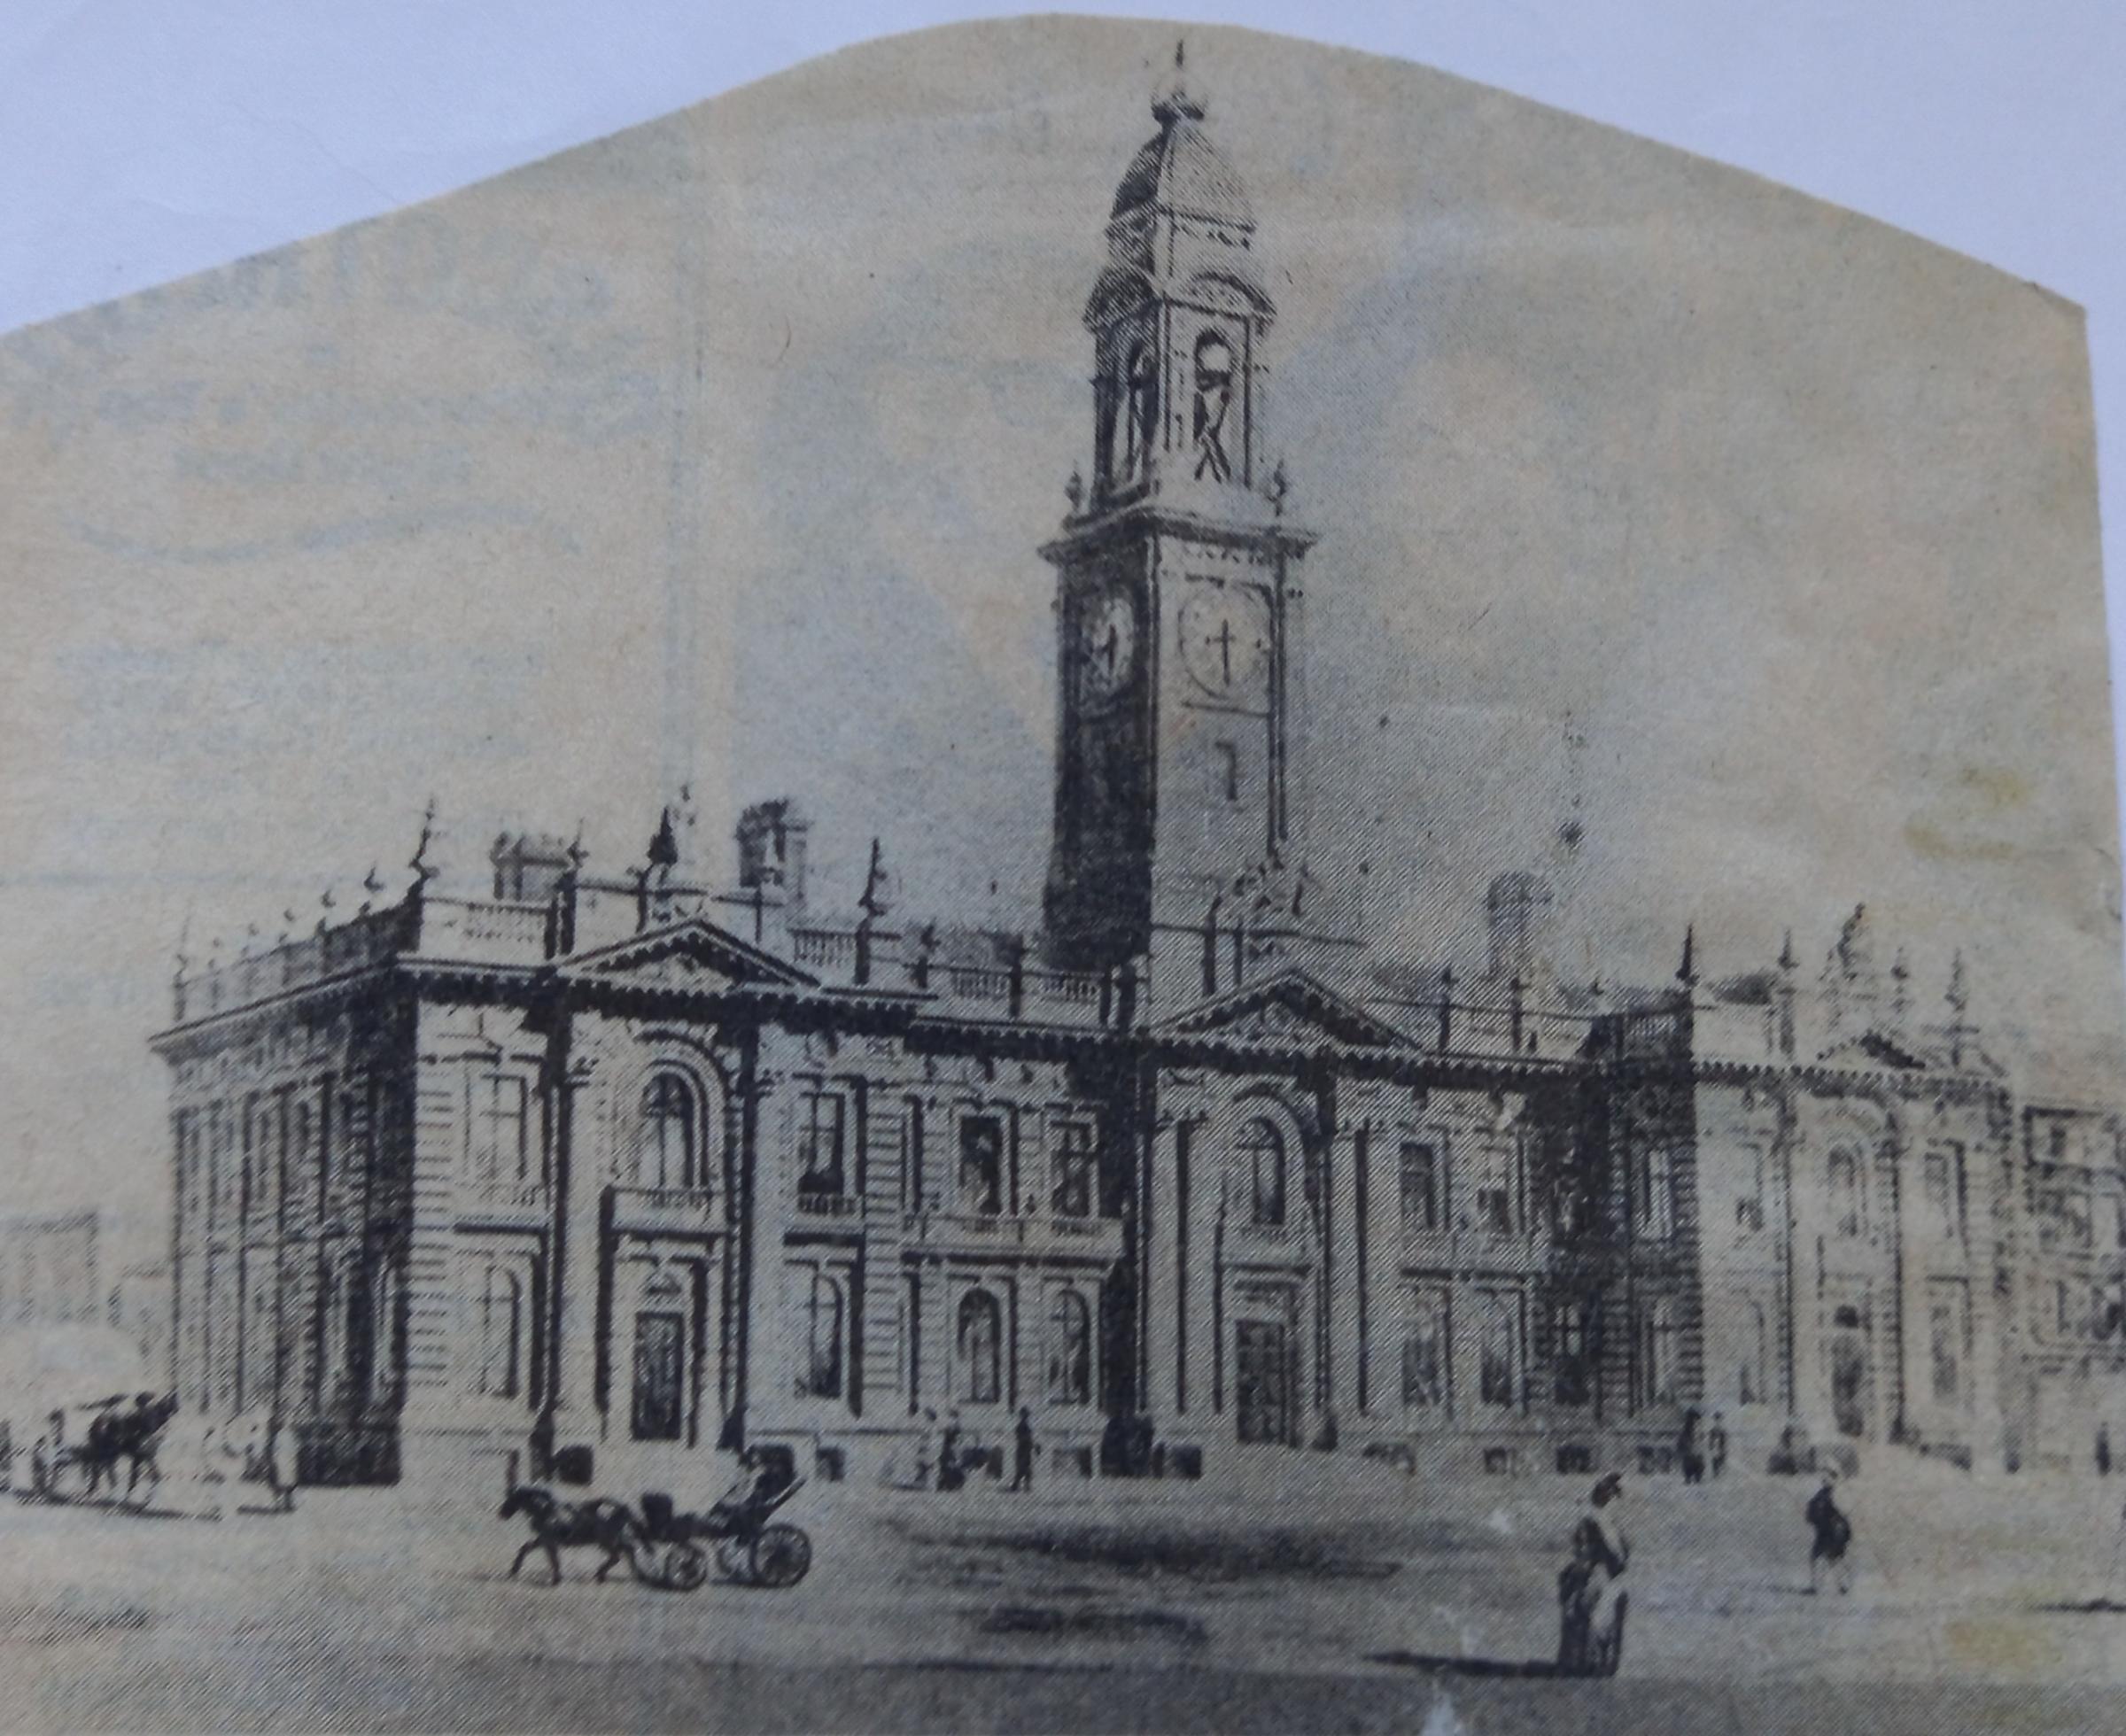 By 1872 Worcester Guildhall was in a bad way and a competition was held to design a new one. This is a rare sketch of the winning entry by Christopher Wray. After much furore, the City Council decided to renovate what it had